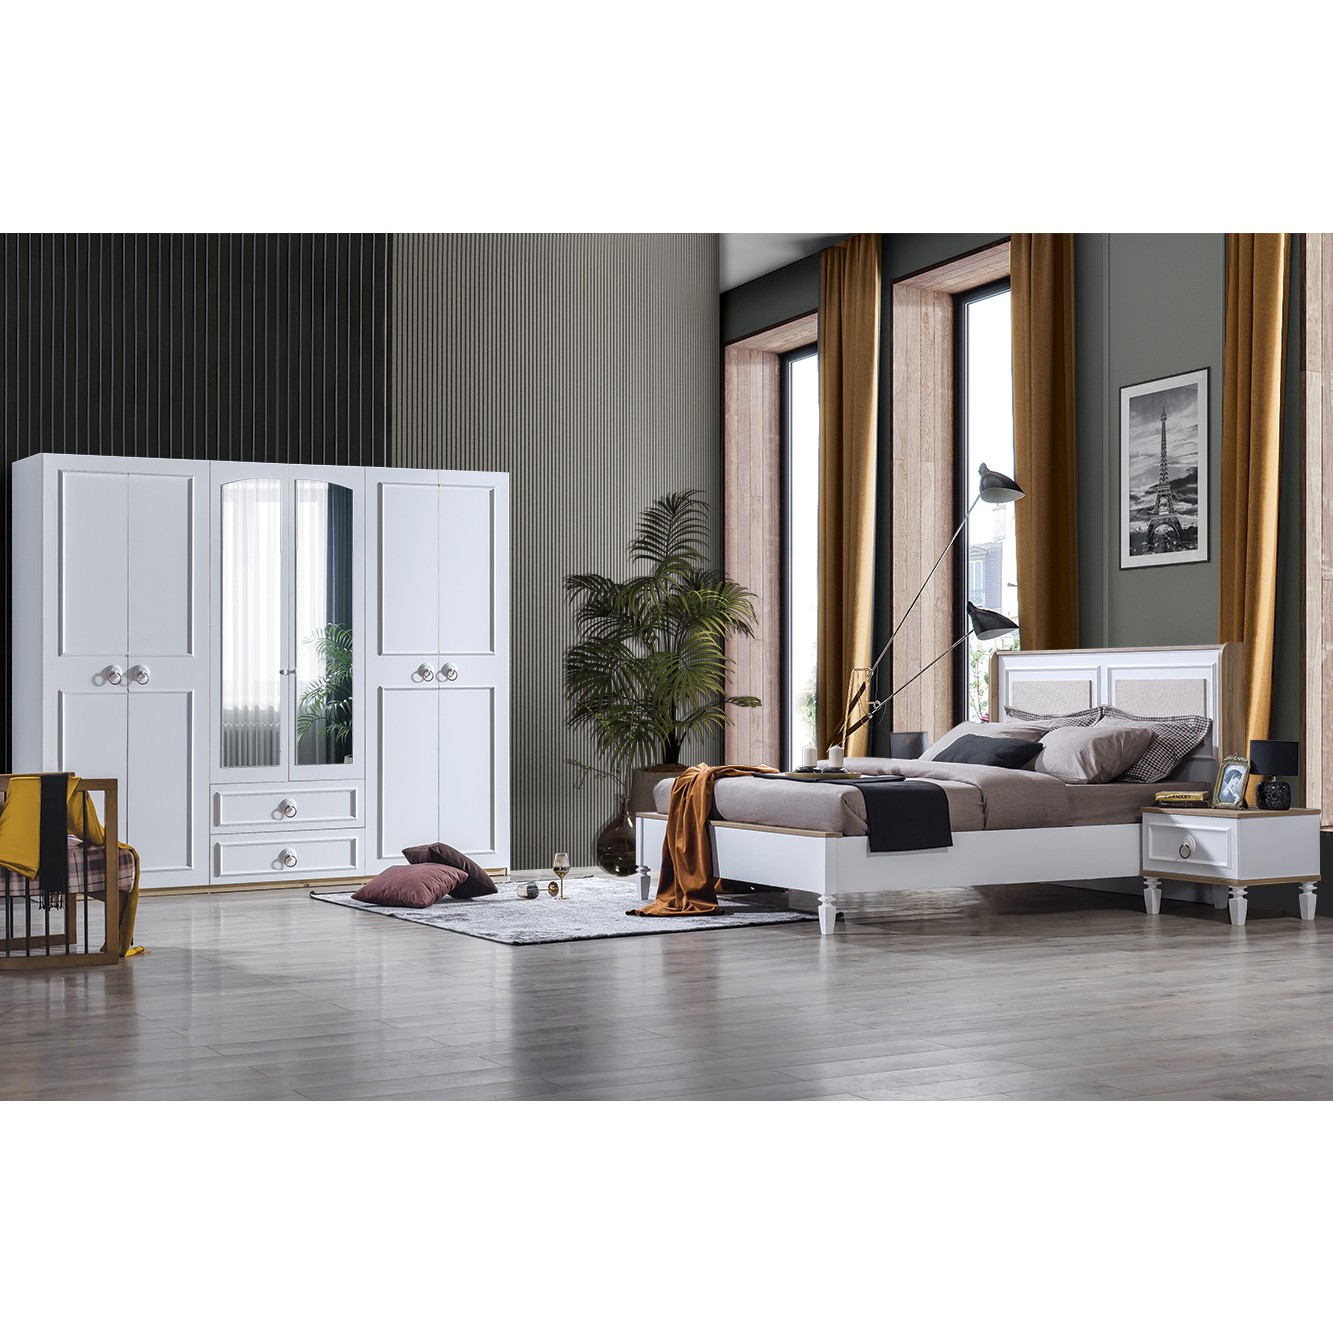 Mila Vol2 Bedroom (Bed Without Storage 160x200cm)